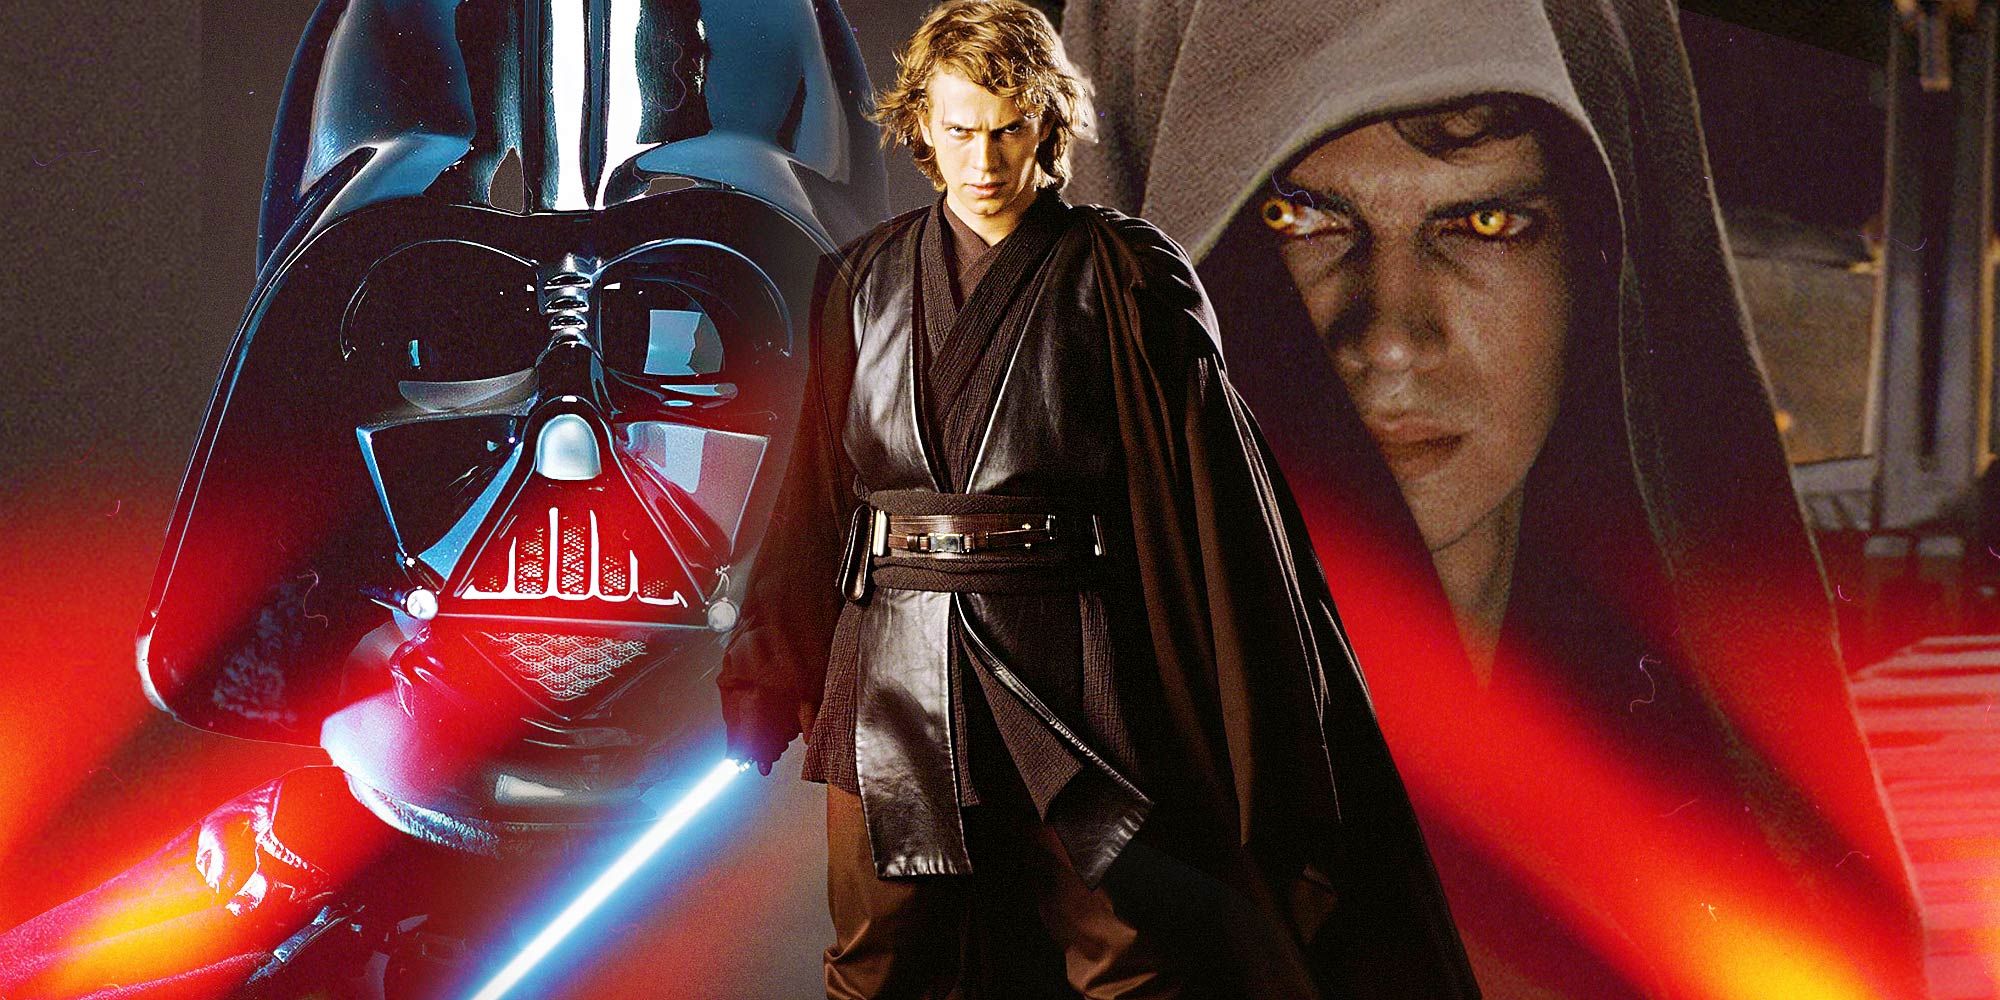 Blended image of Hayden Christensen as Anakin Skywalker with Sith eyes to the right and Darth Vader to the left with Anakin in the foreground